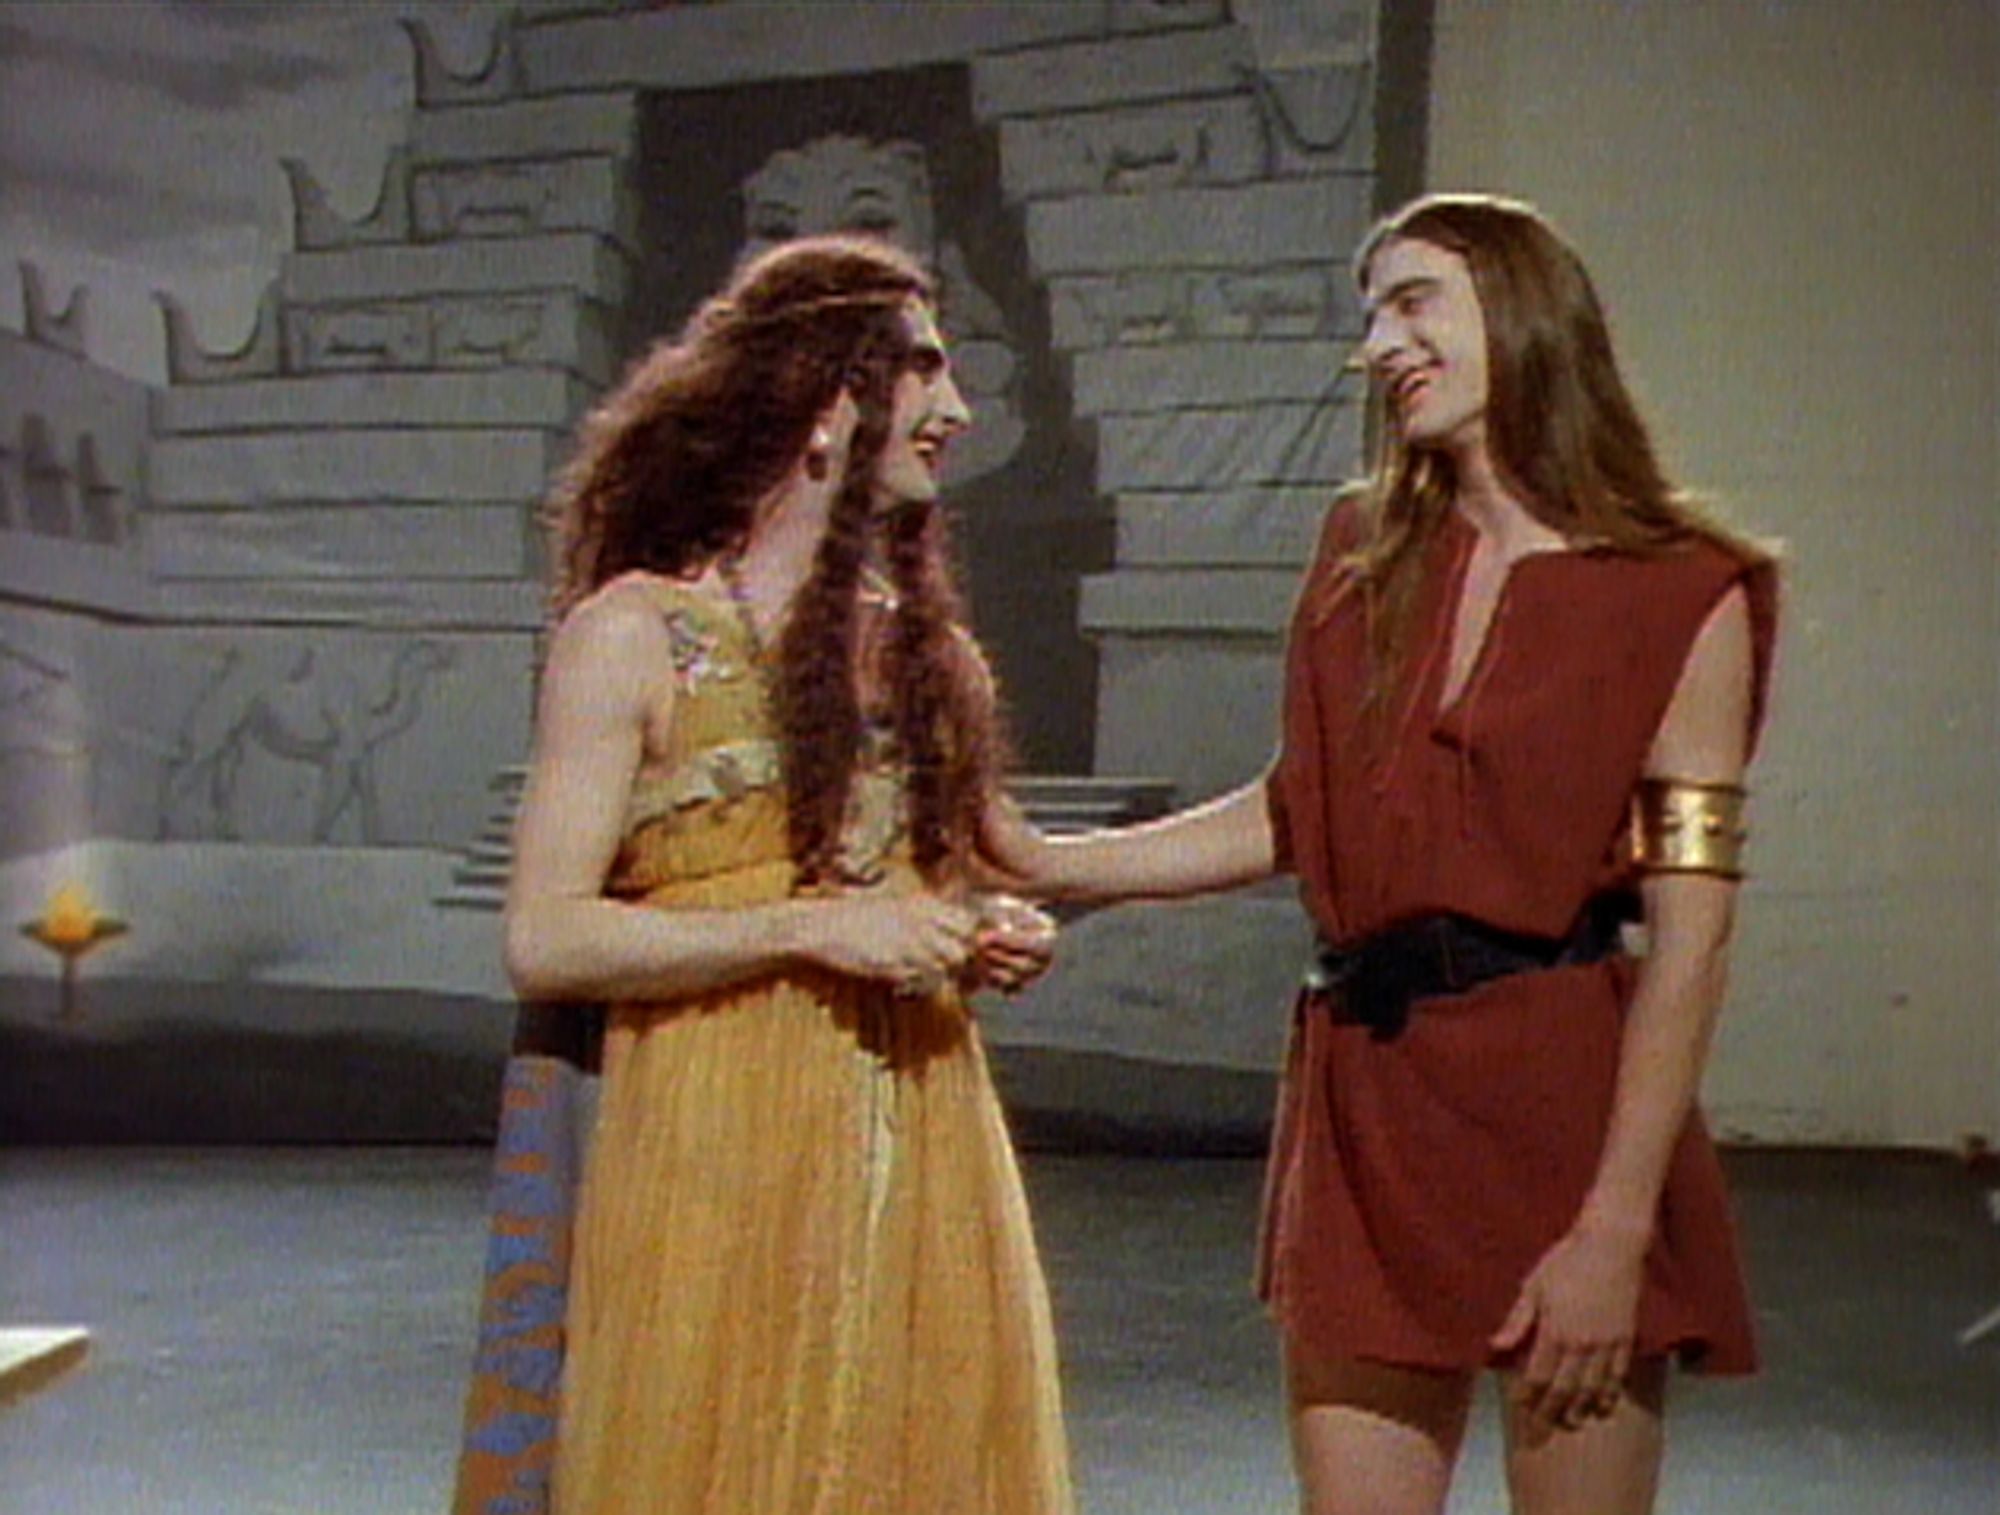 Two drag queens playing Biblical figures converse with one another.